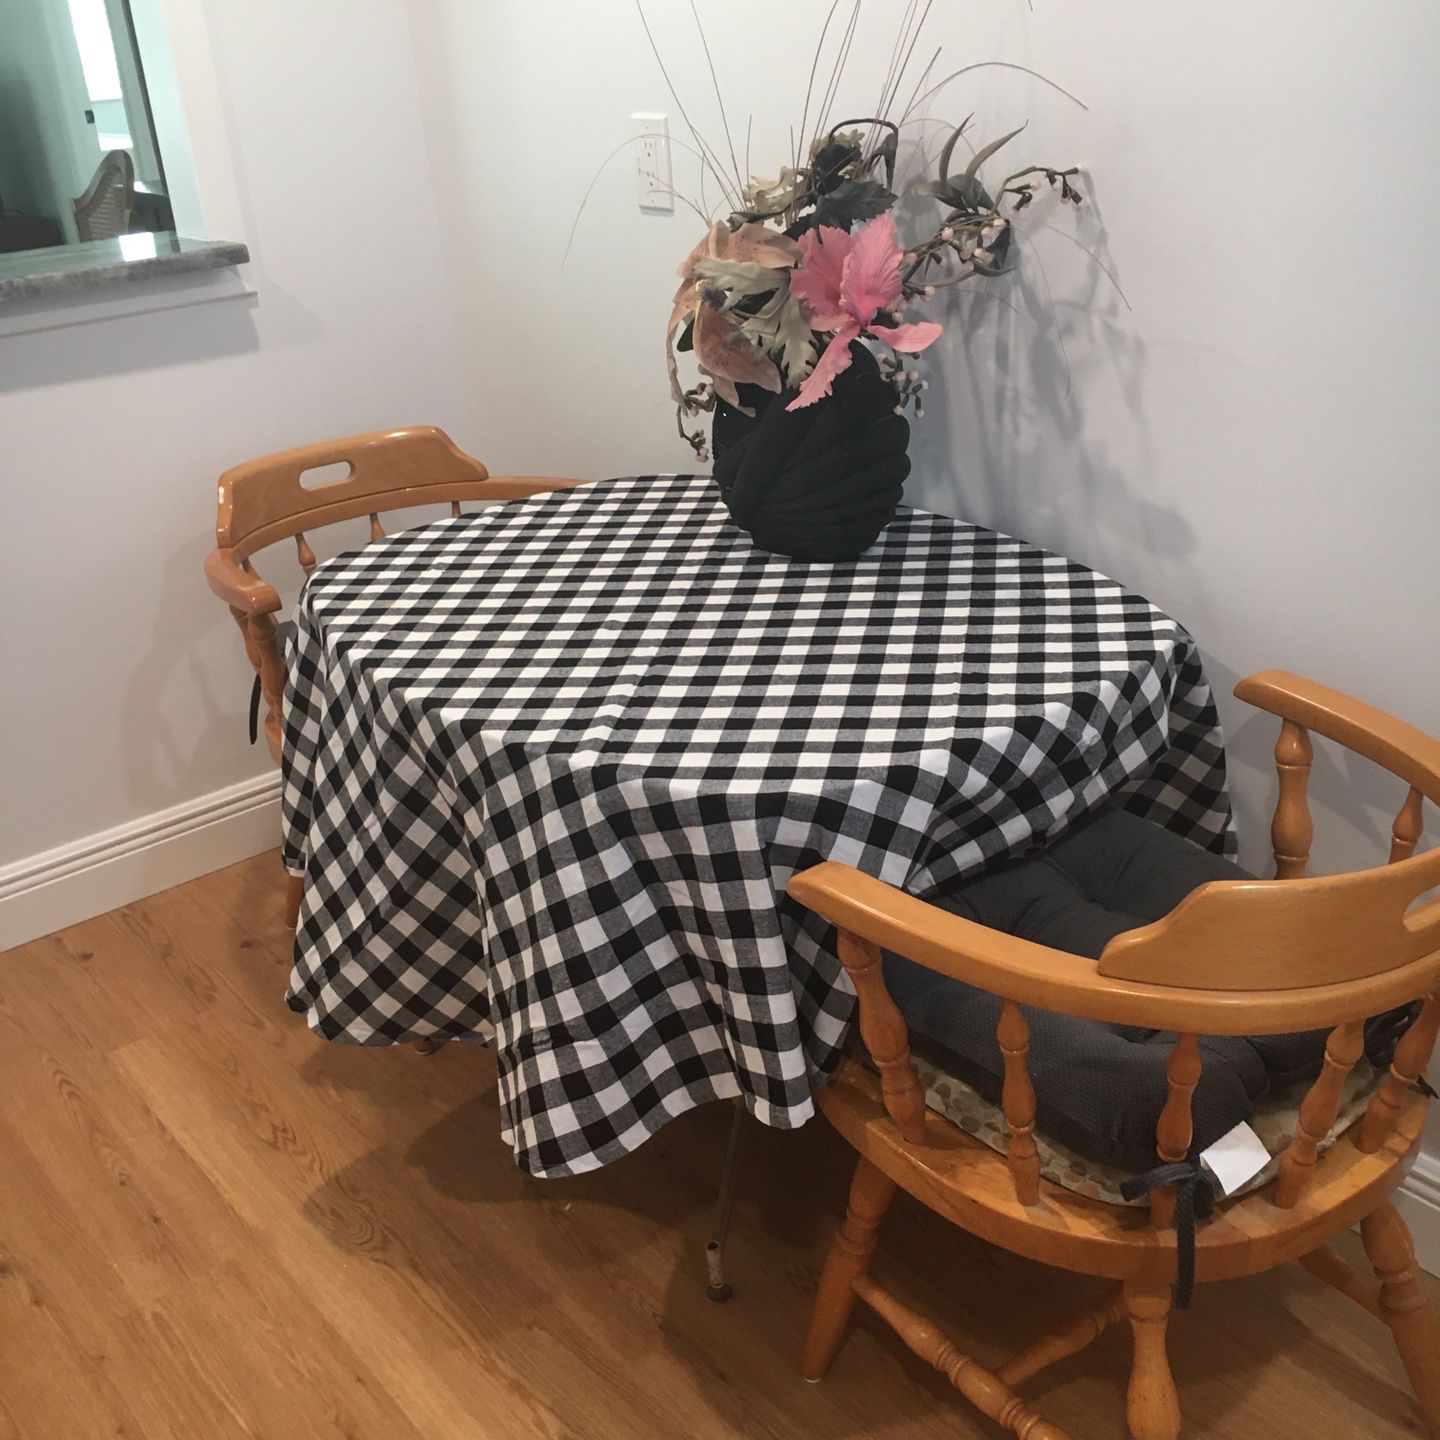 Small kitchen table with two chairs